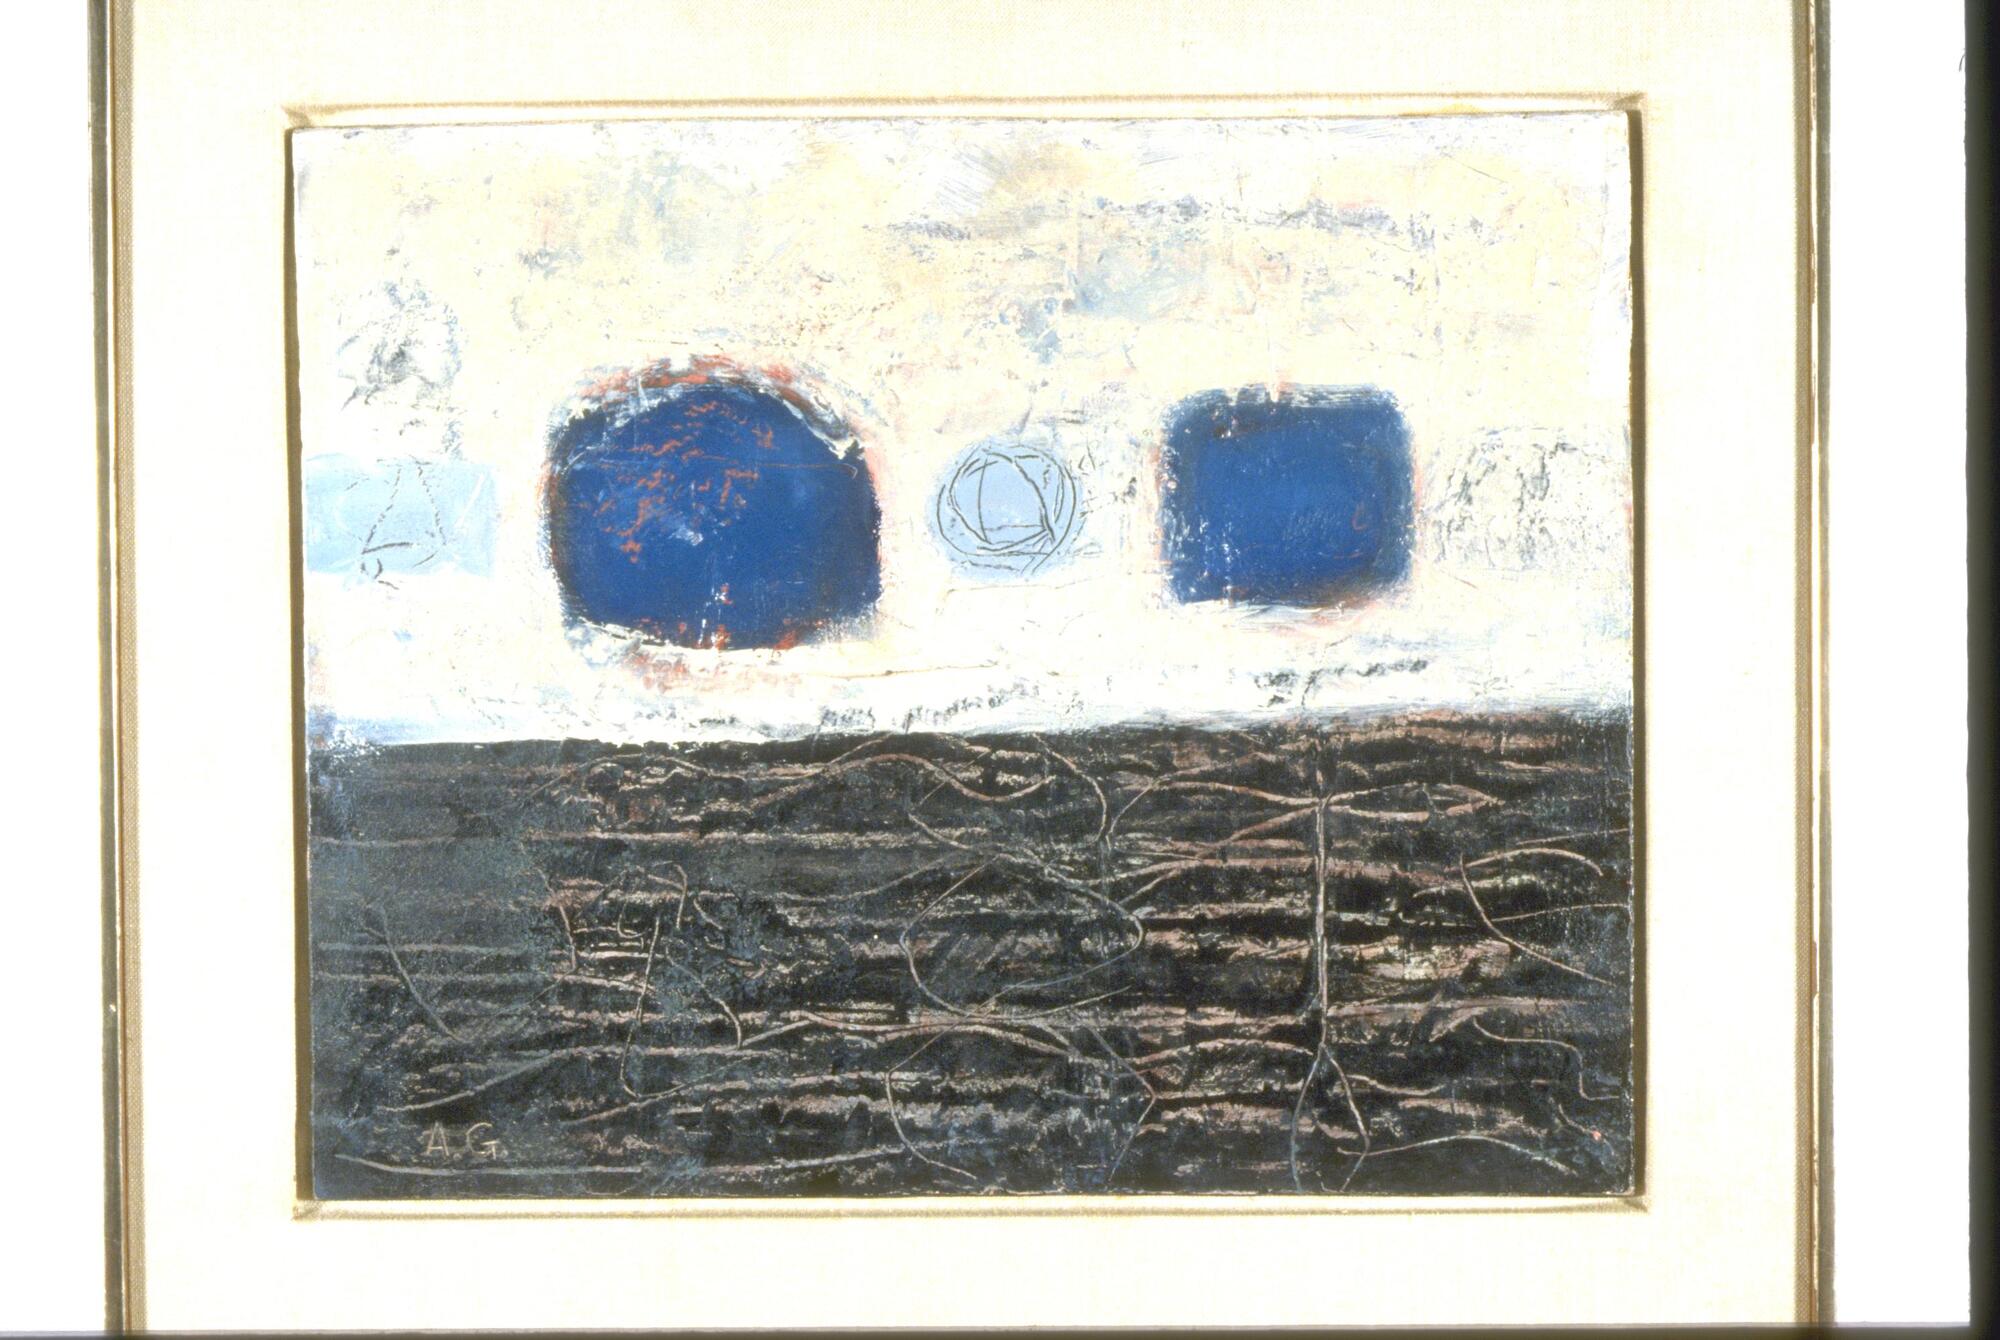 A landscape reduced to minimal abstract elements. The lower half of the painting is black. The upper half, various shades of white and blue. Two black squares are suspended in the white above the black. A small pale blue circle is between the squares.